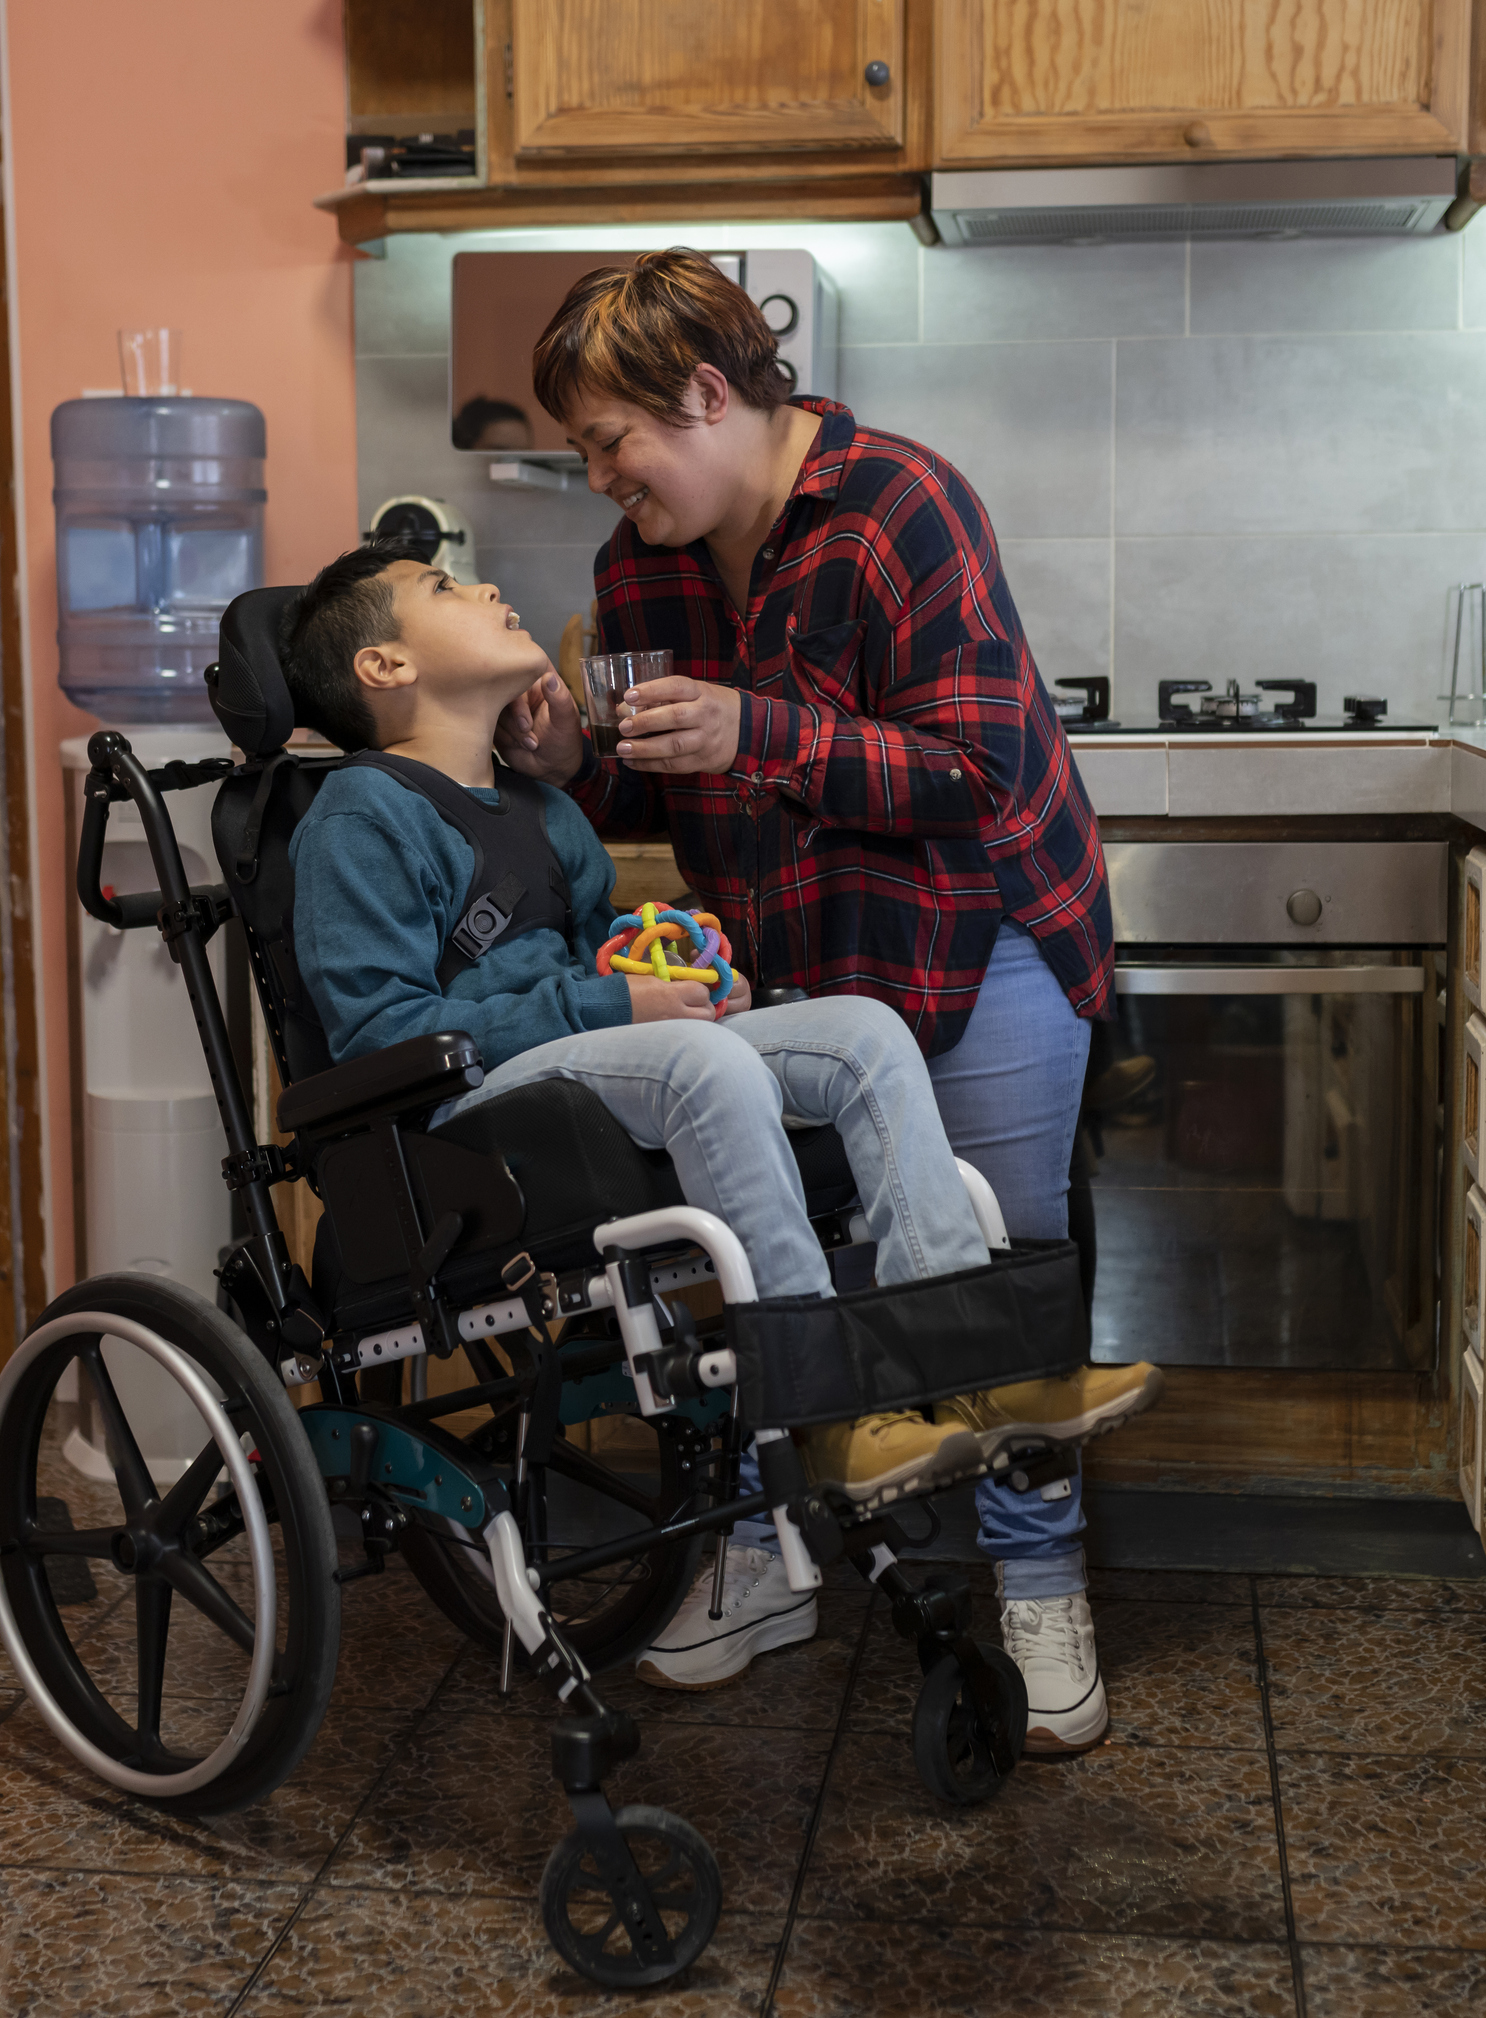 Mother caring for her wheelchair-bound disabled son in the kitchen.